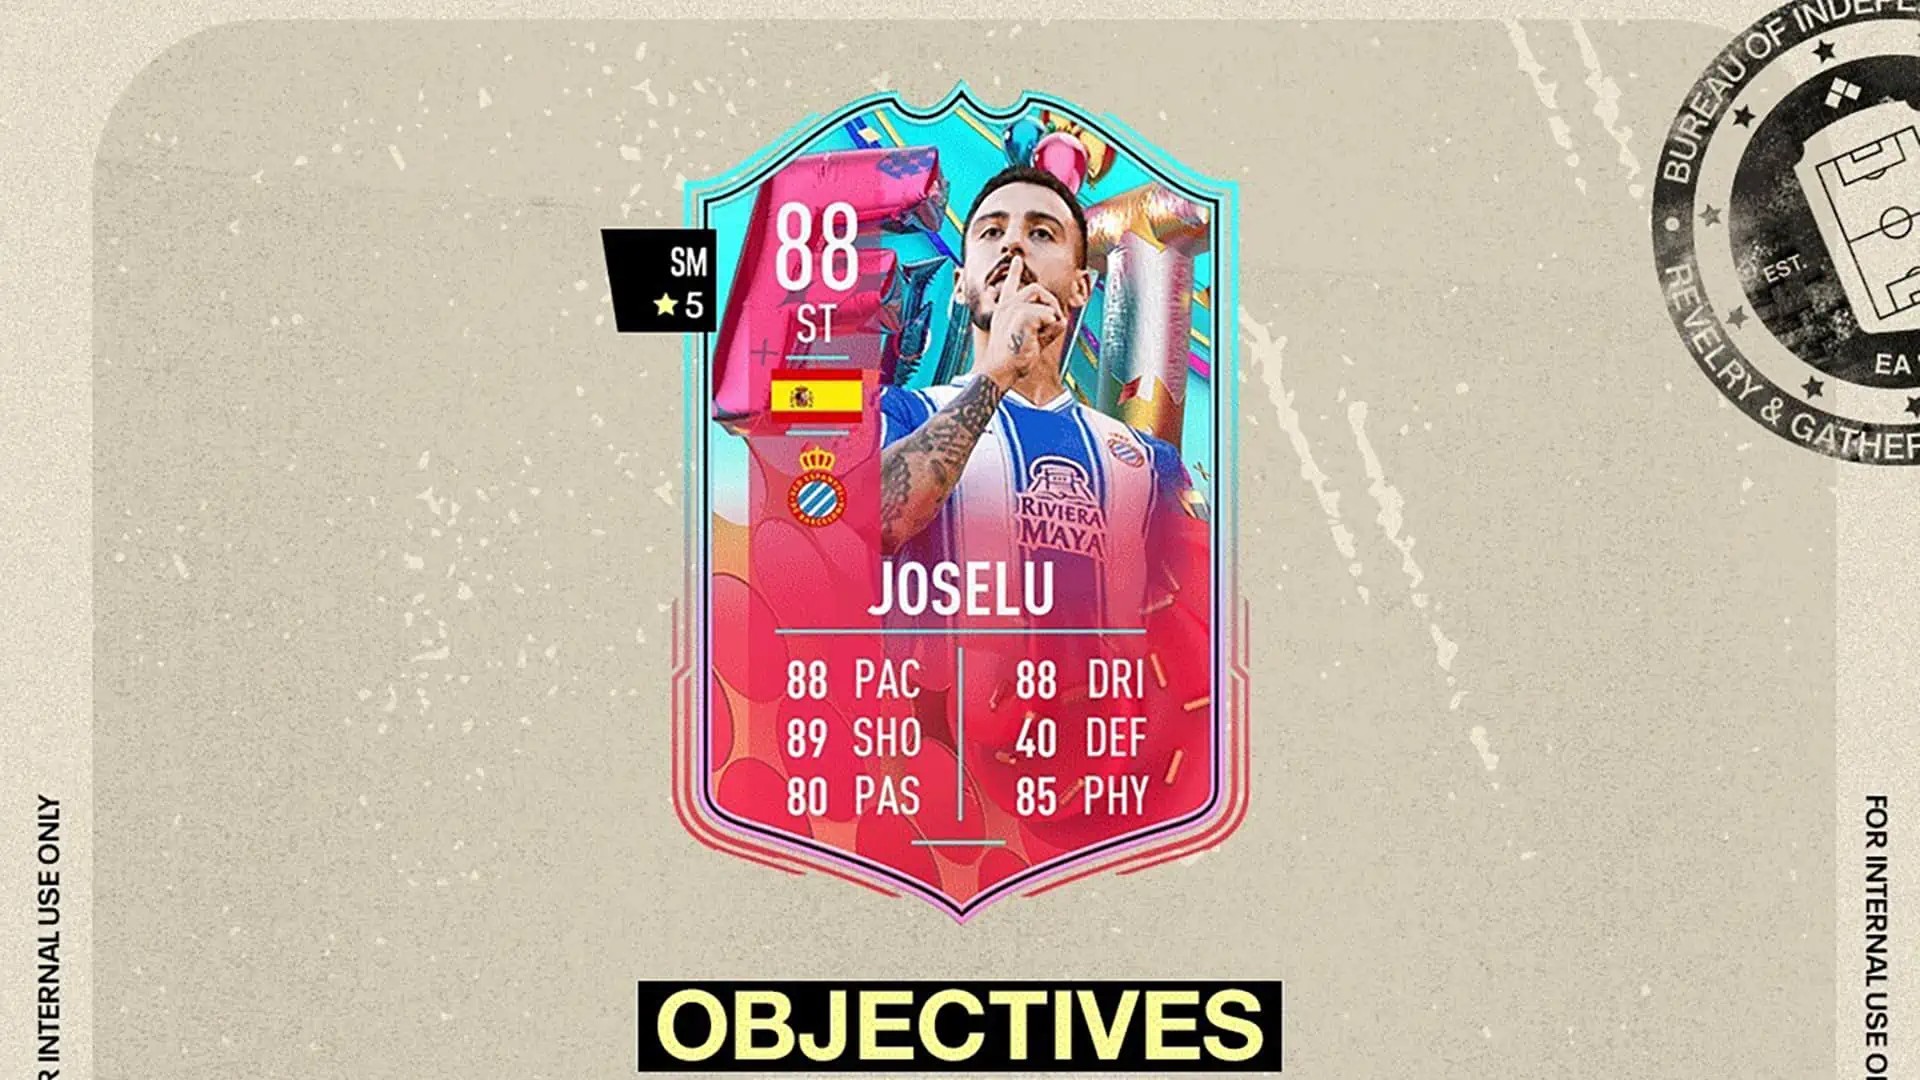 FIFA 23: Joselu’s Object from the FUT Birthday campaign